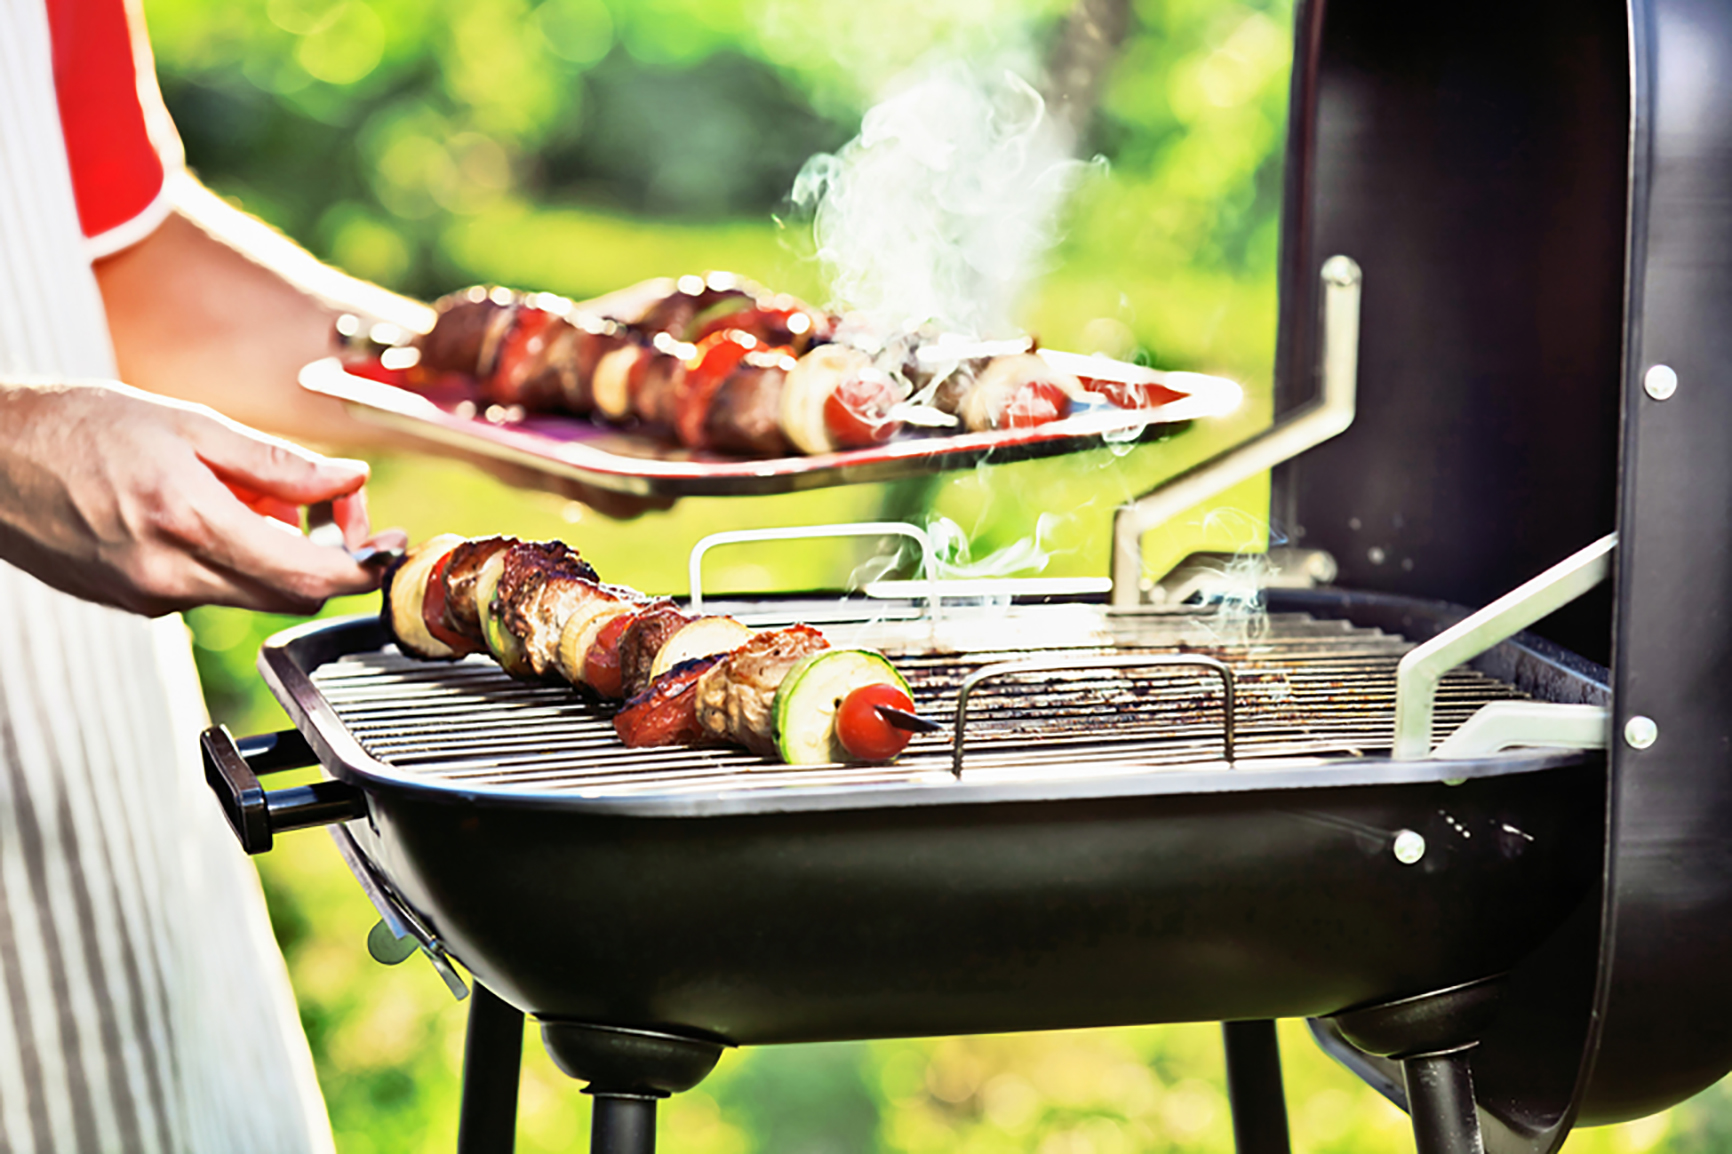 small barbecue grill with some grilled meat on sticks.